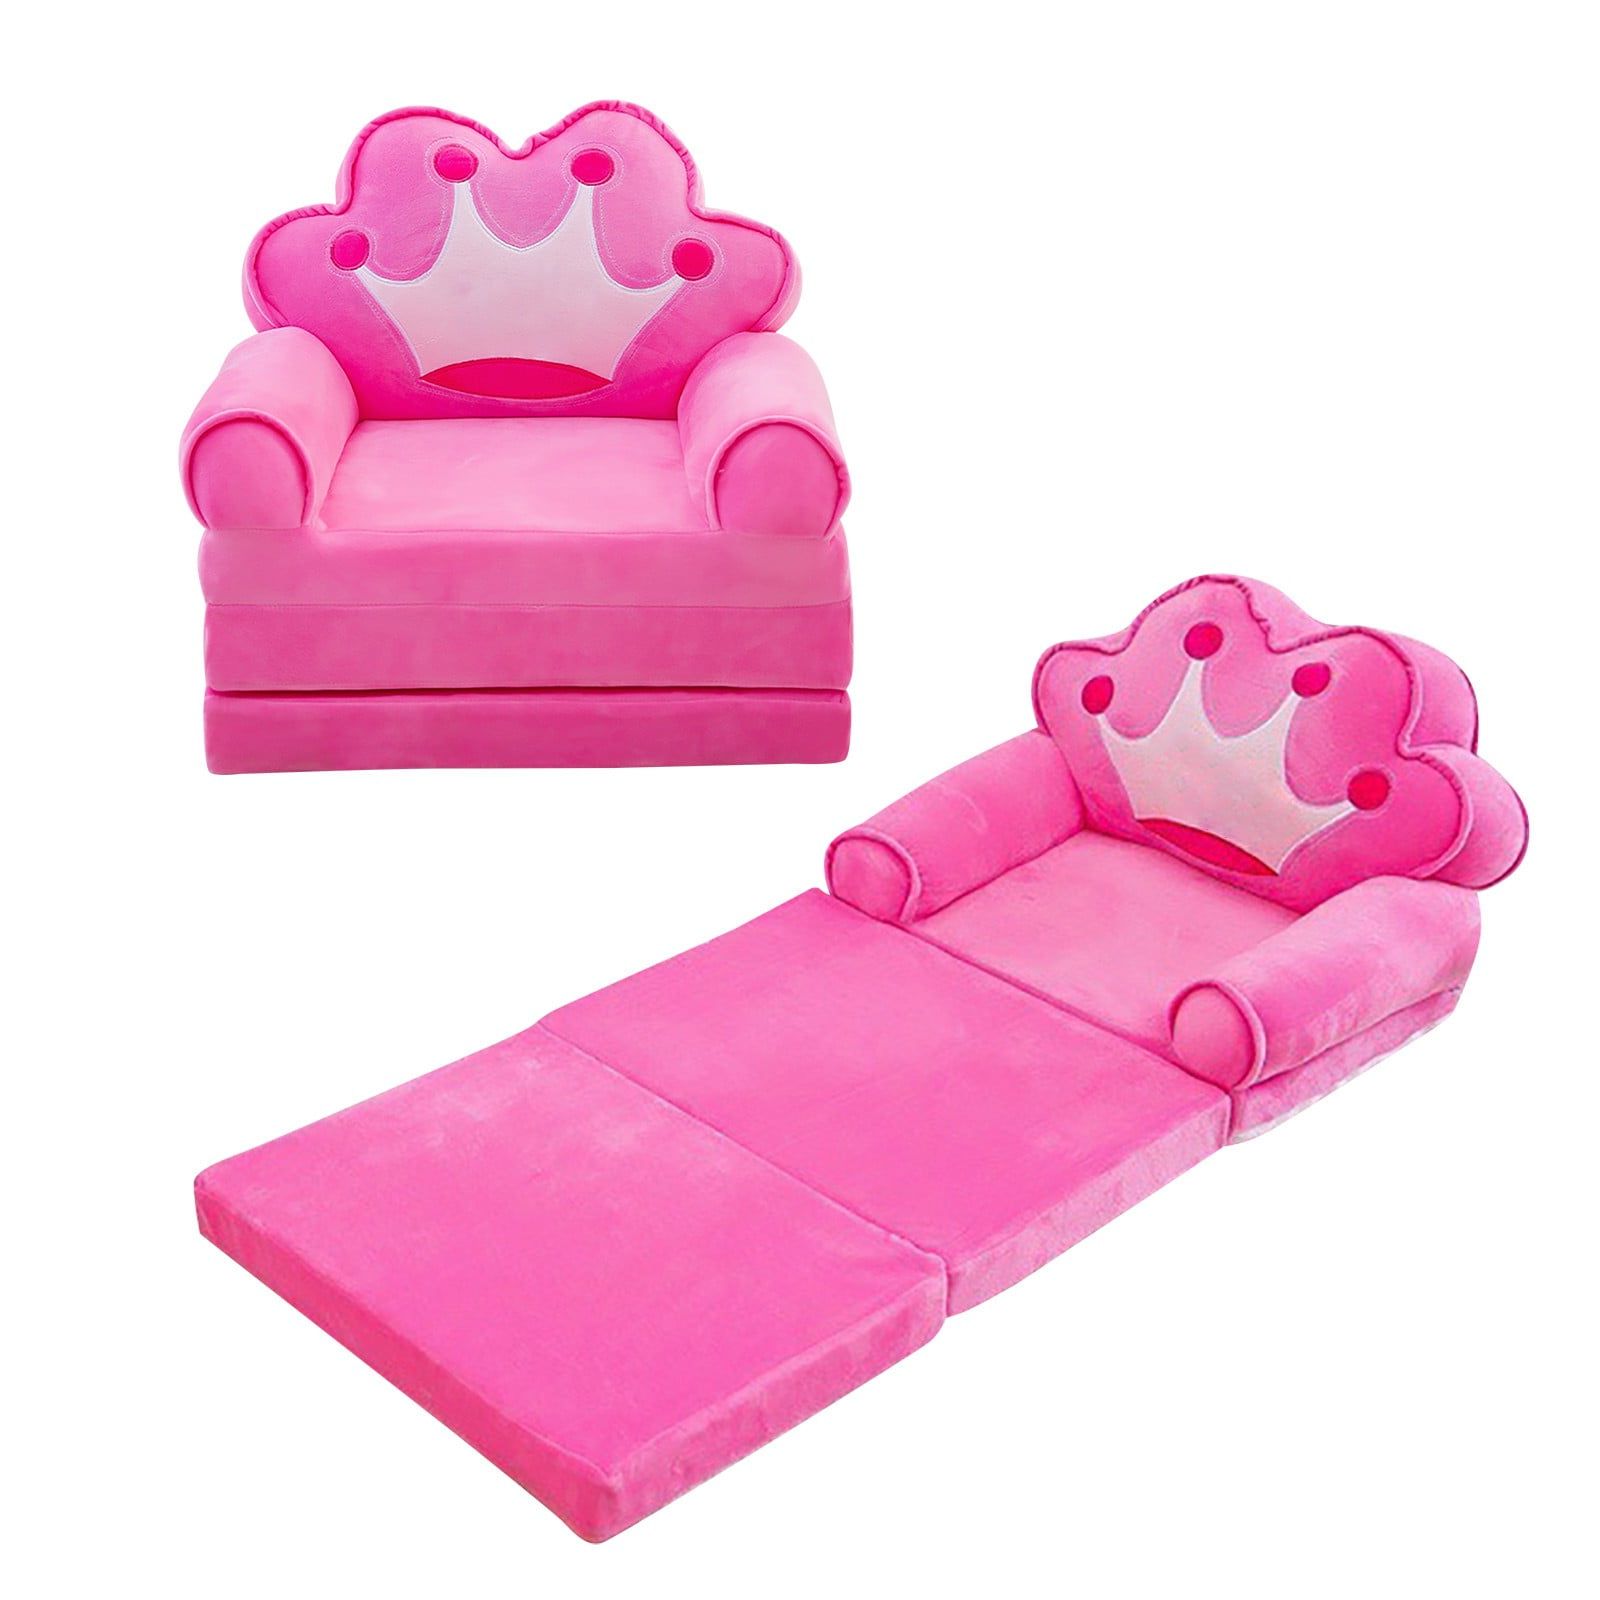 2 In 1 Foldable Children's Sofa Beds Intended For Most Popular Plush Foldable Kids Sofa Backrest Armchair 2 In 1 Foldable Children (View 11 of 15)